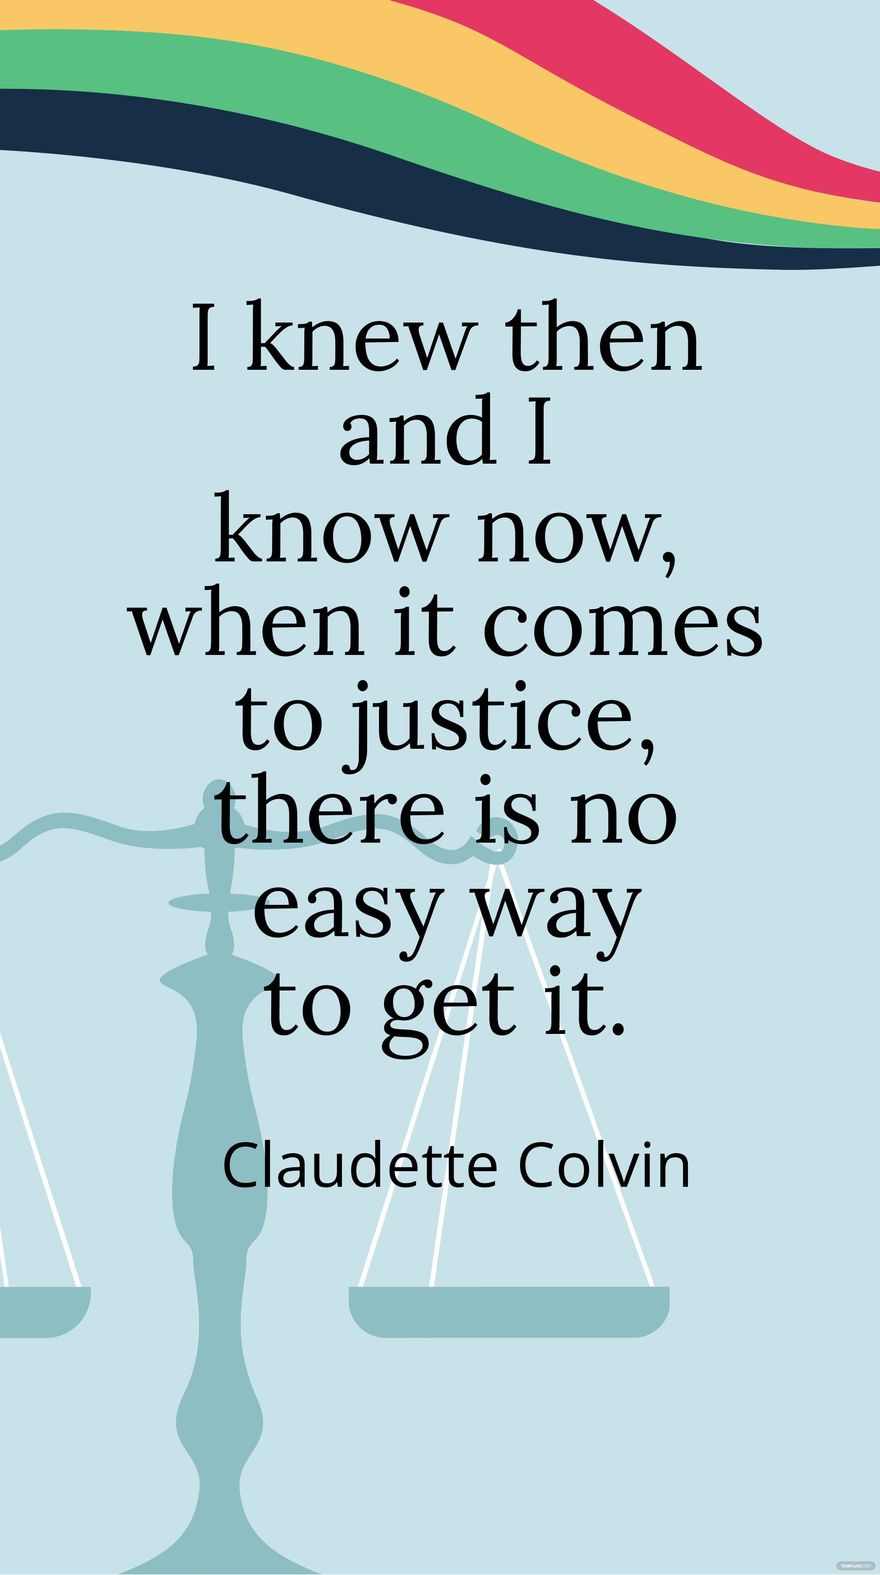 Claudette Colvin - I knew then and I know now, when it comes to justice, there is no easy way to get it. in JPG